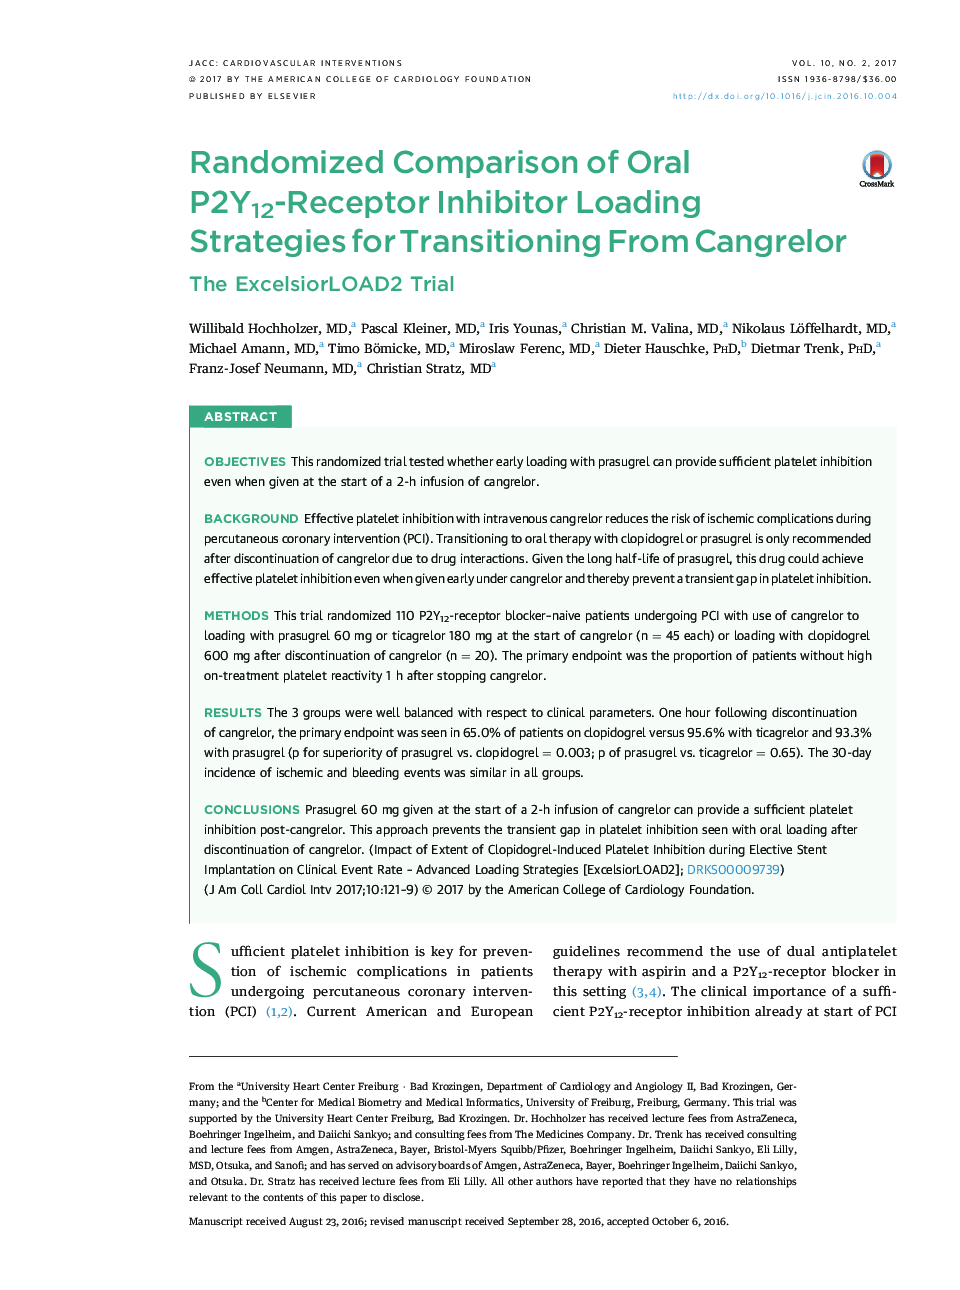 Randomized Comparison of Oral P2Y12-Receptor Inhibitor Loading Strategies for Transitioning From Cangrelor